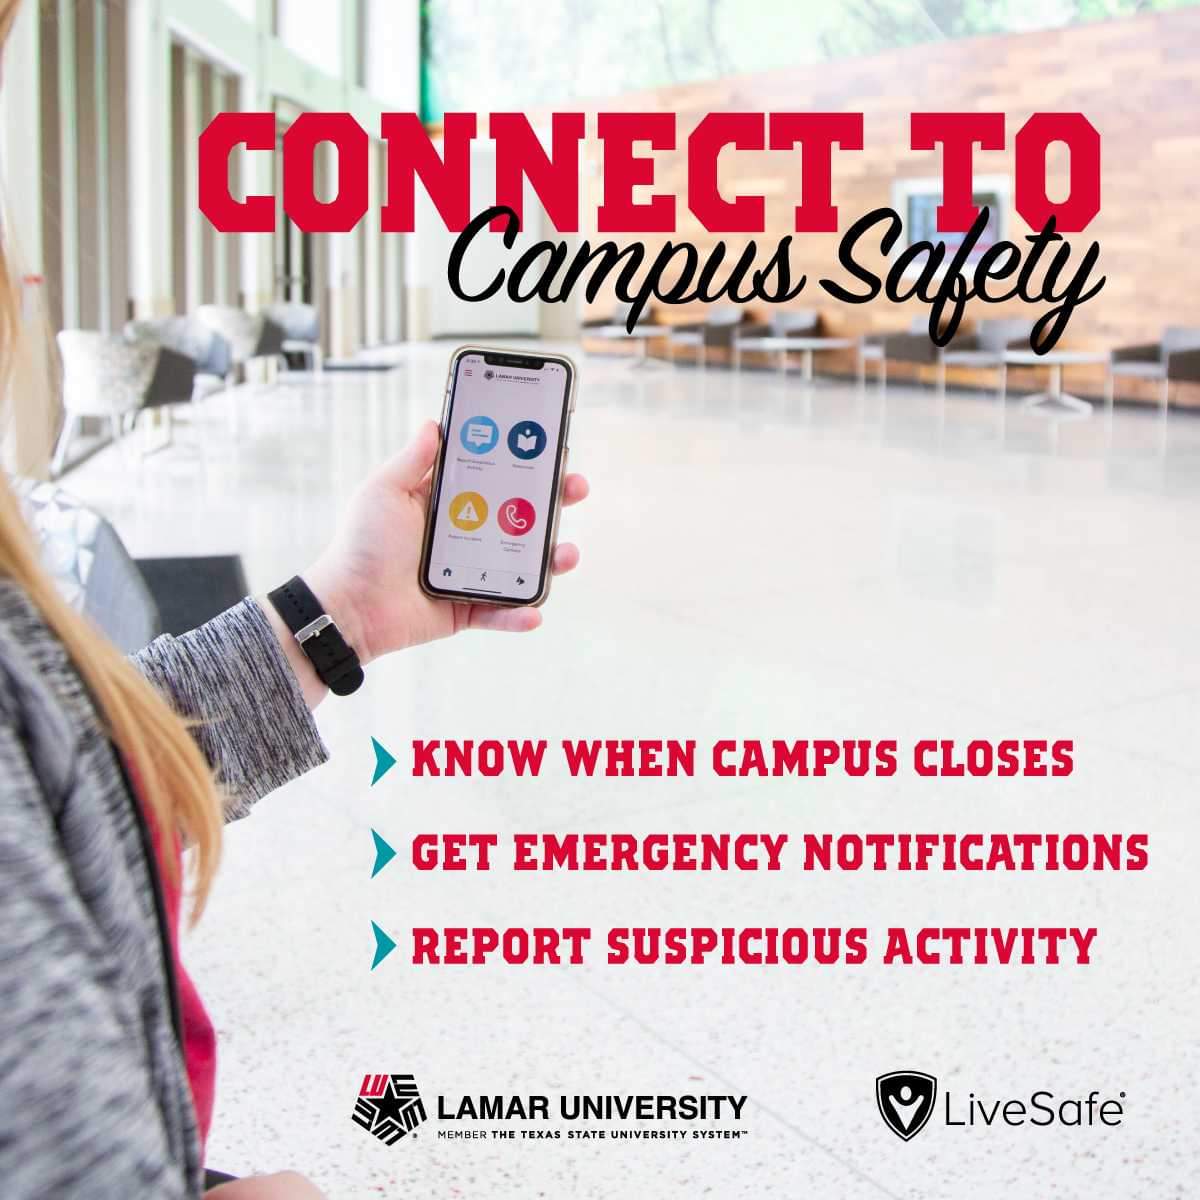 Live Safe: Connect to Campus Safety. Know when campus closes. Get emergency notifications. Report suspicious activity.